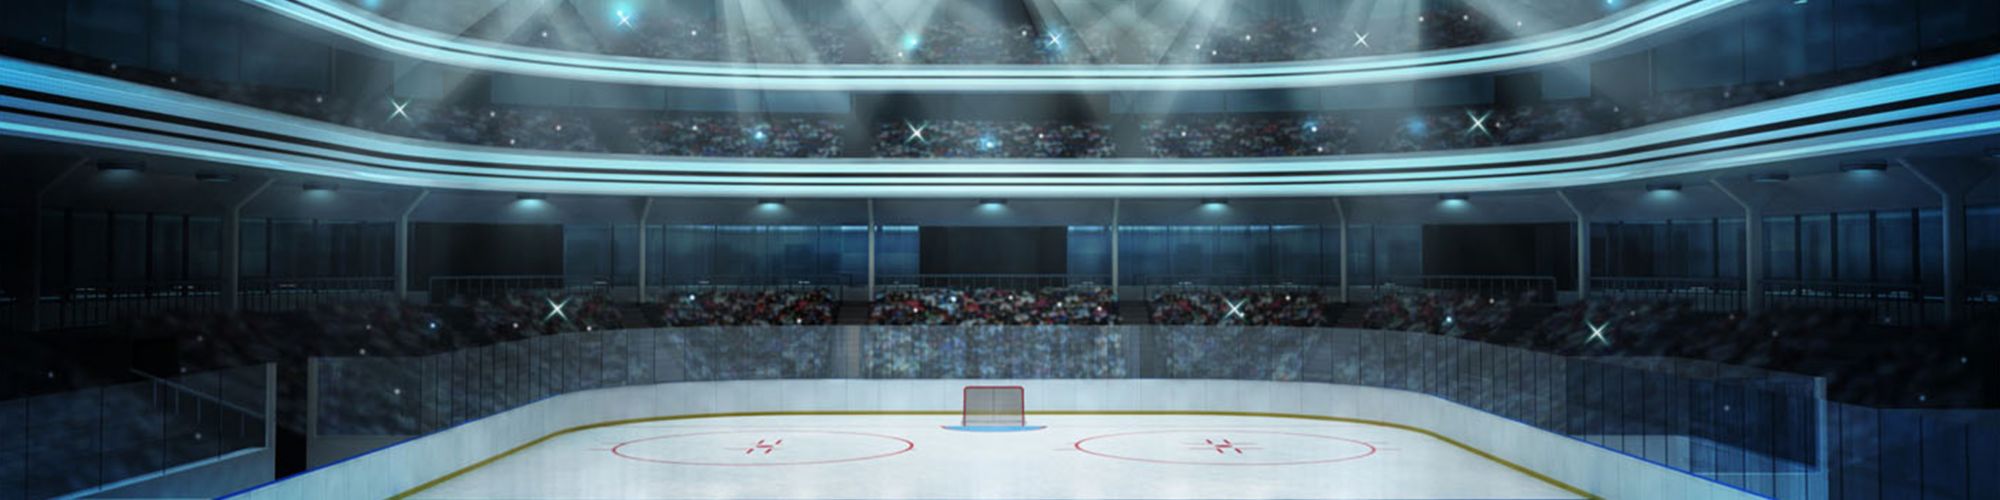 Wide view of a hockey rink